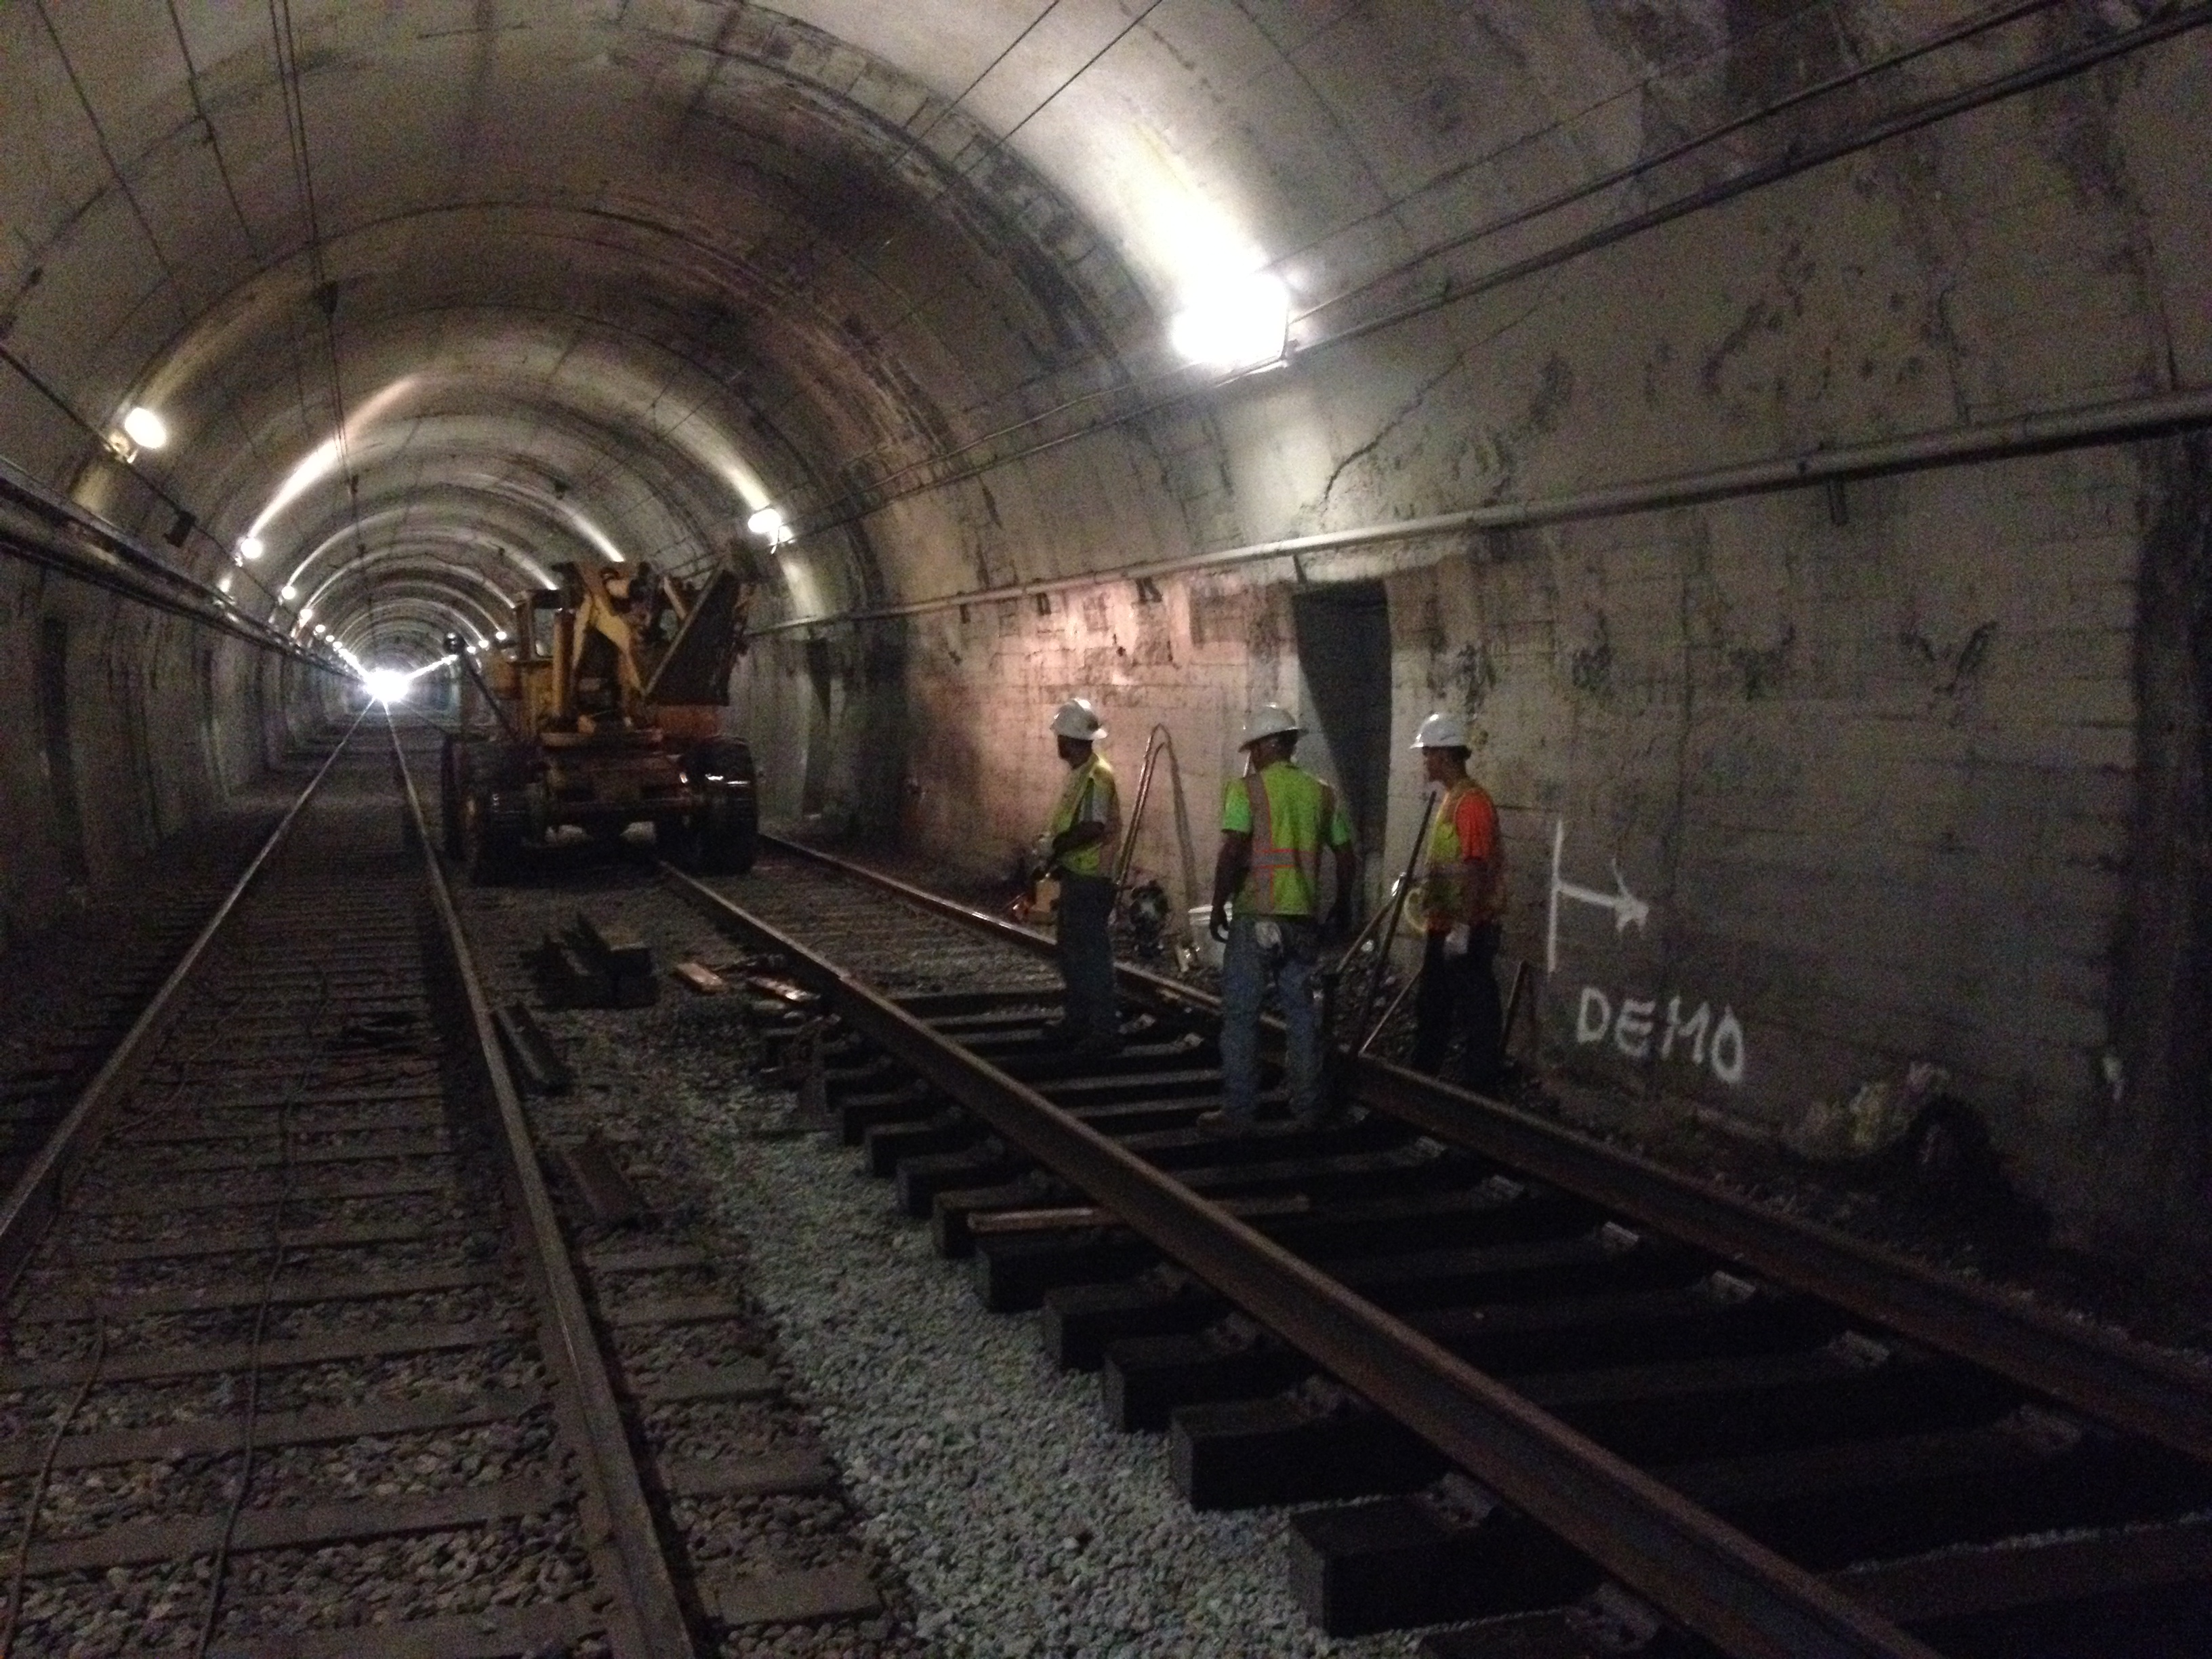 Sunset Tunnel track work crew works on replacing the rail